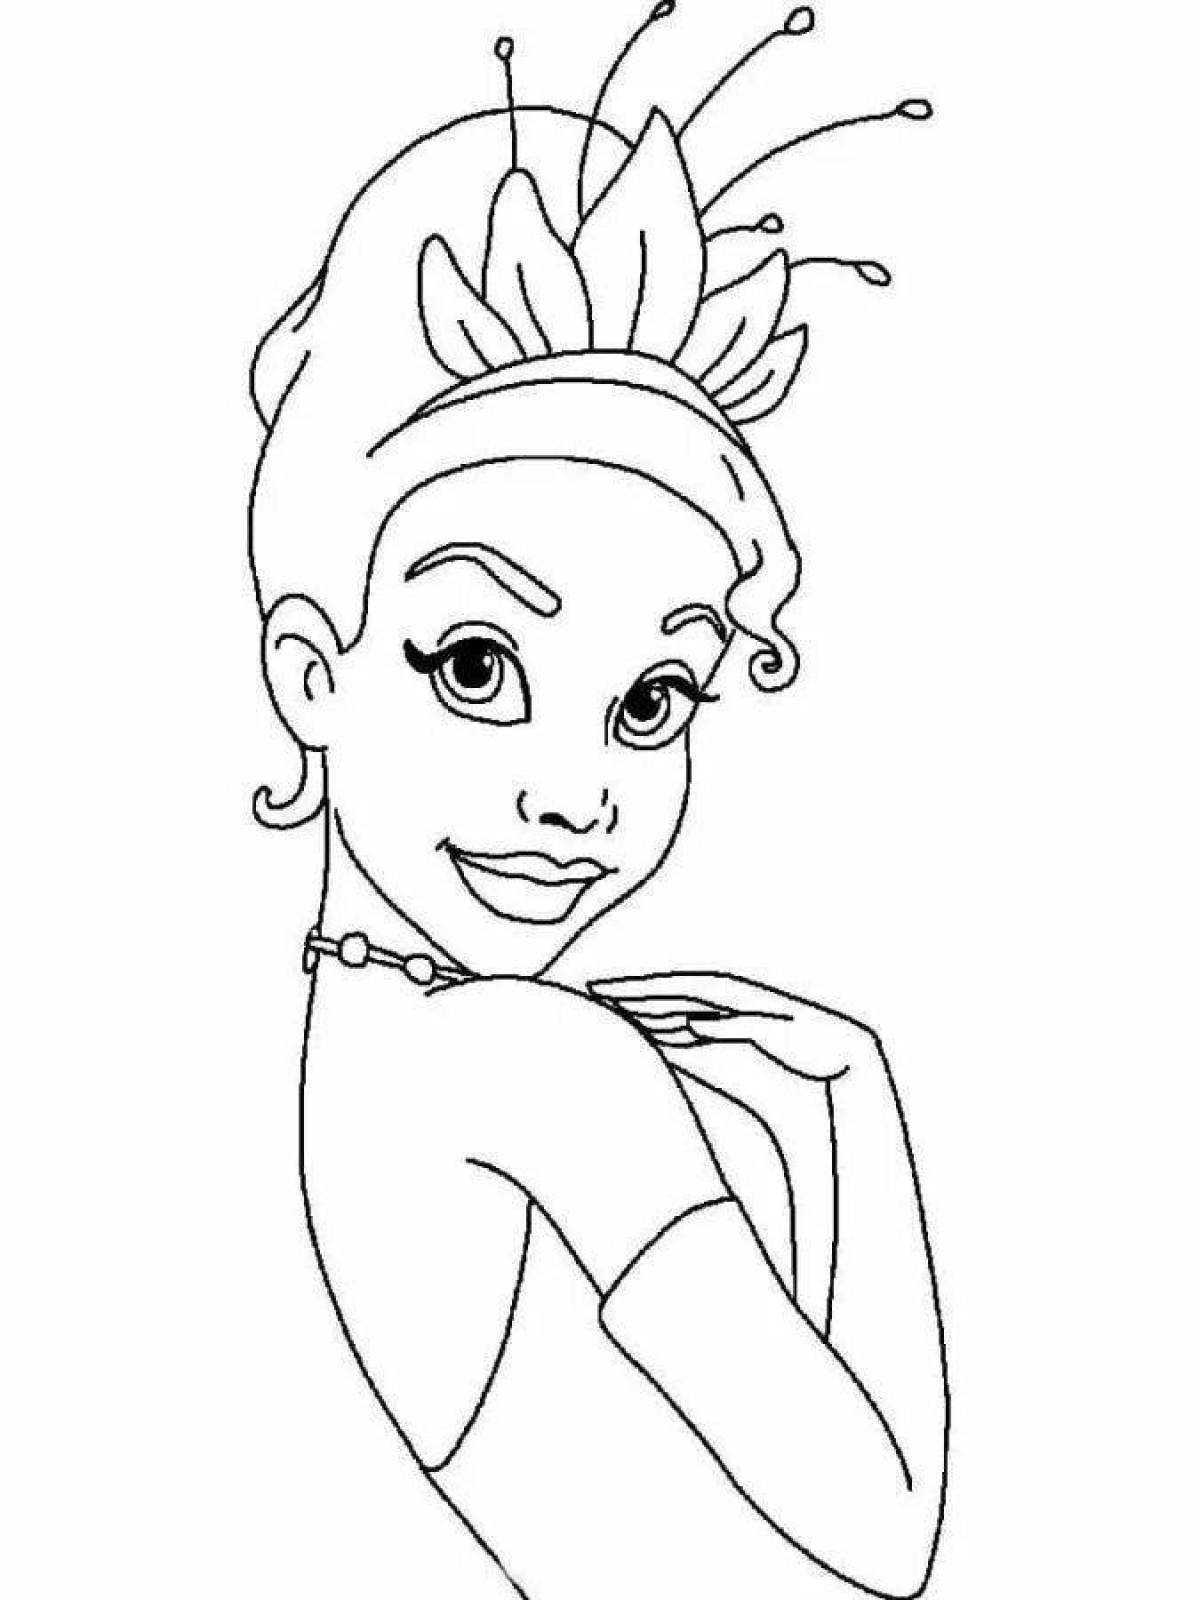 Colorful tiana coloring page